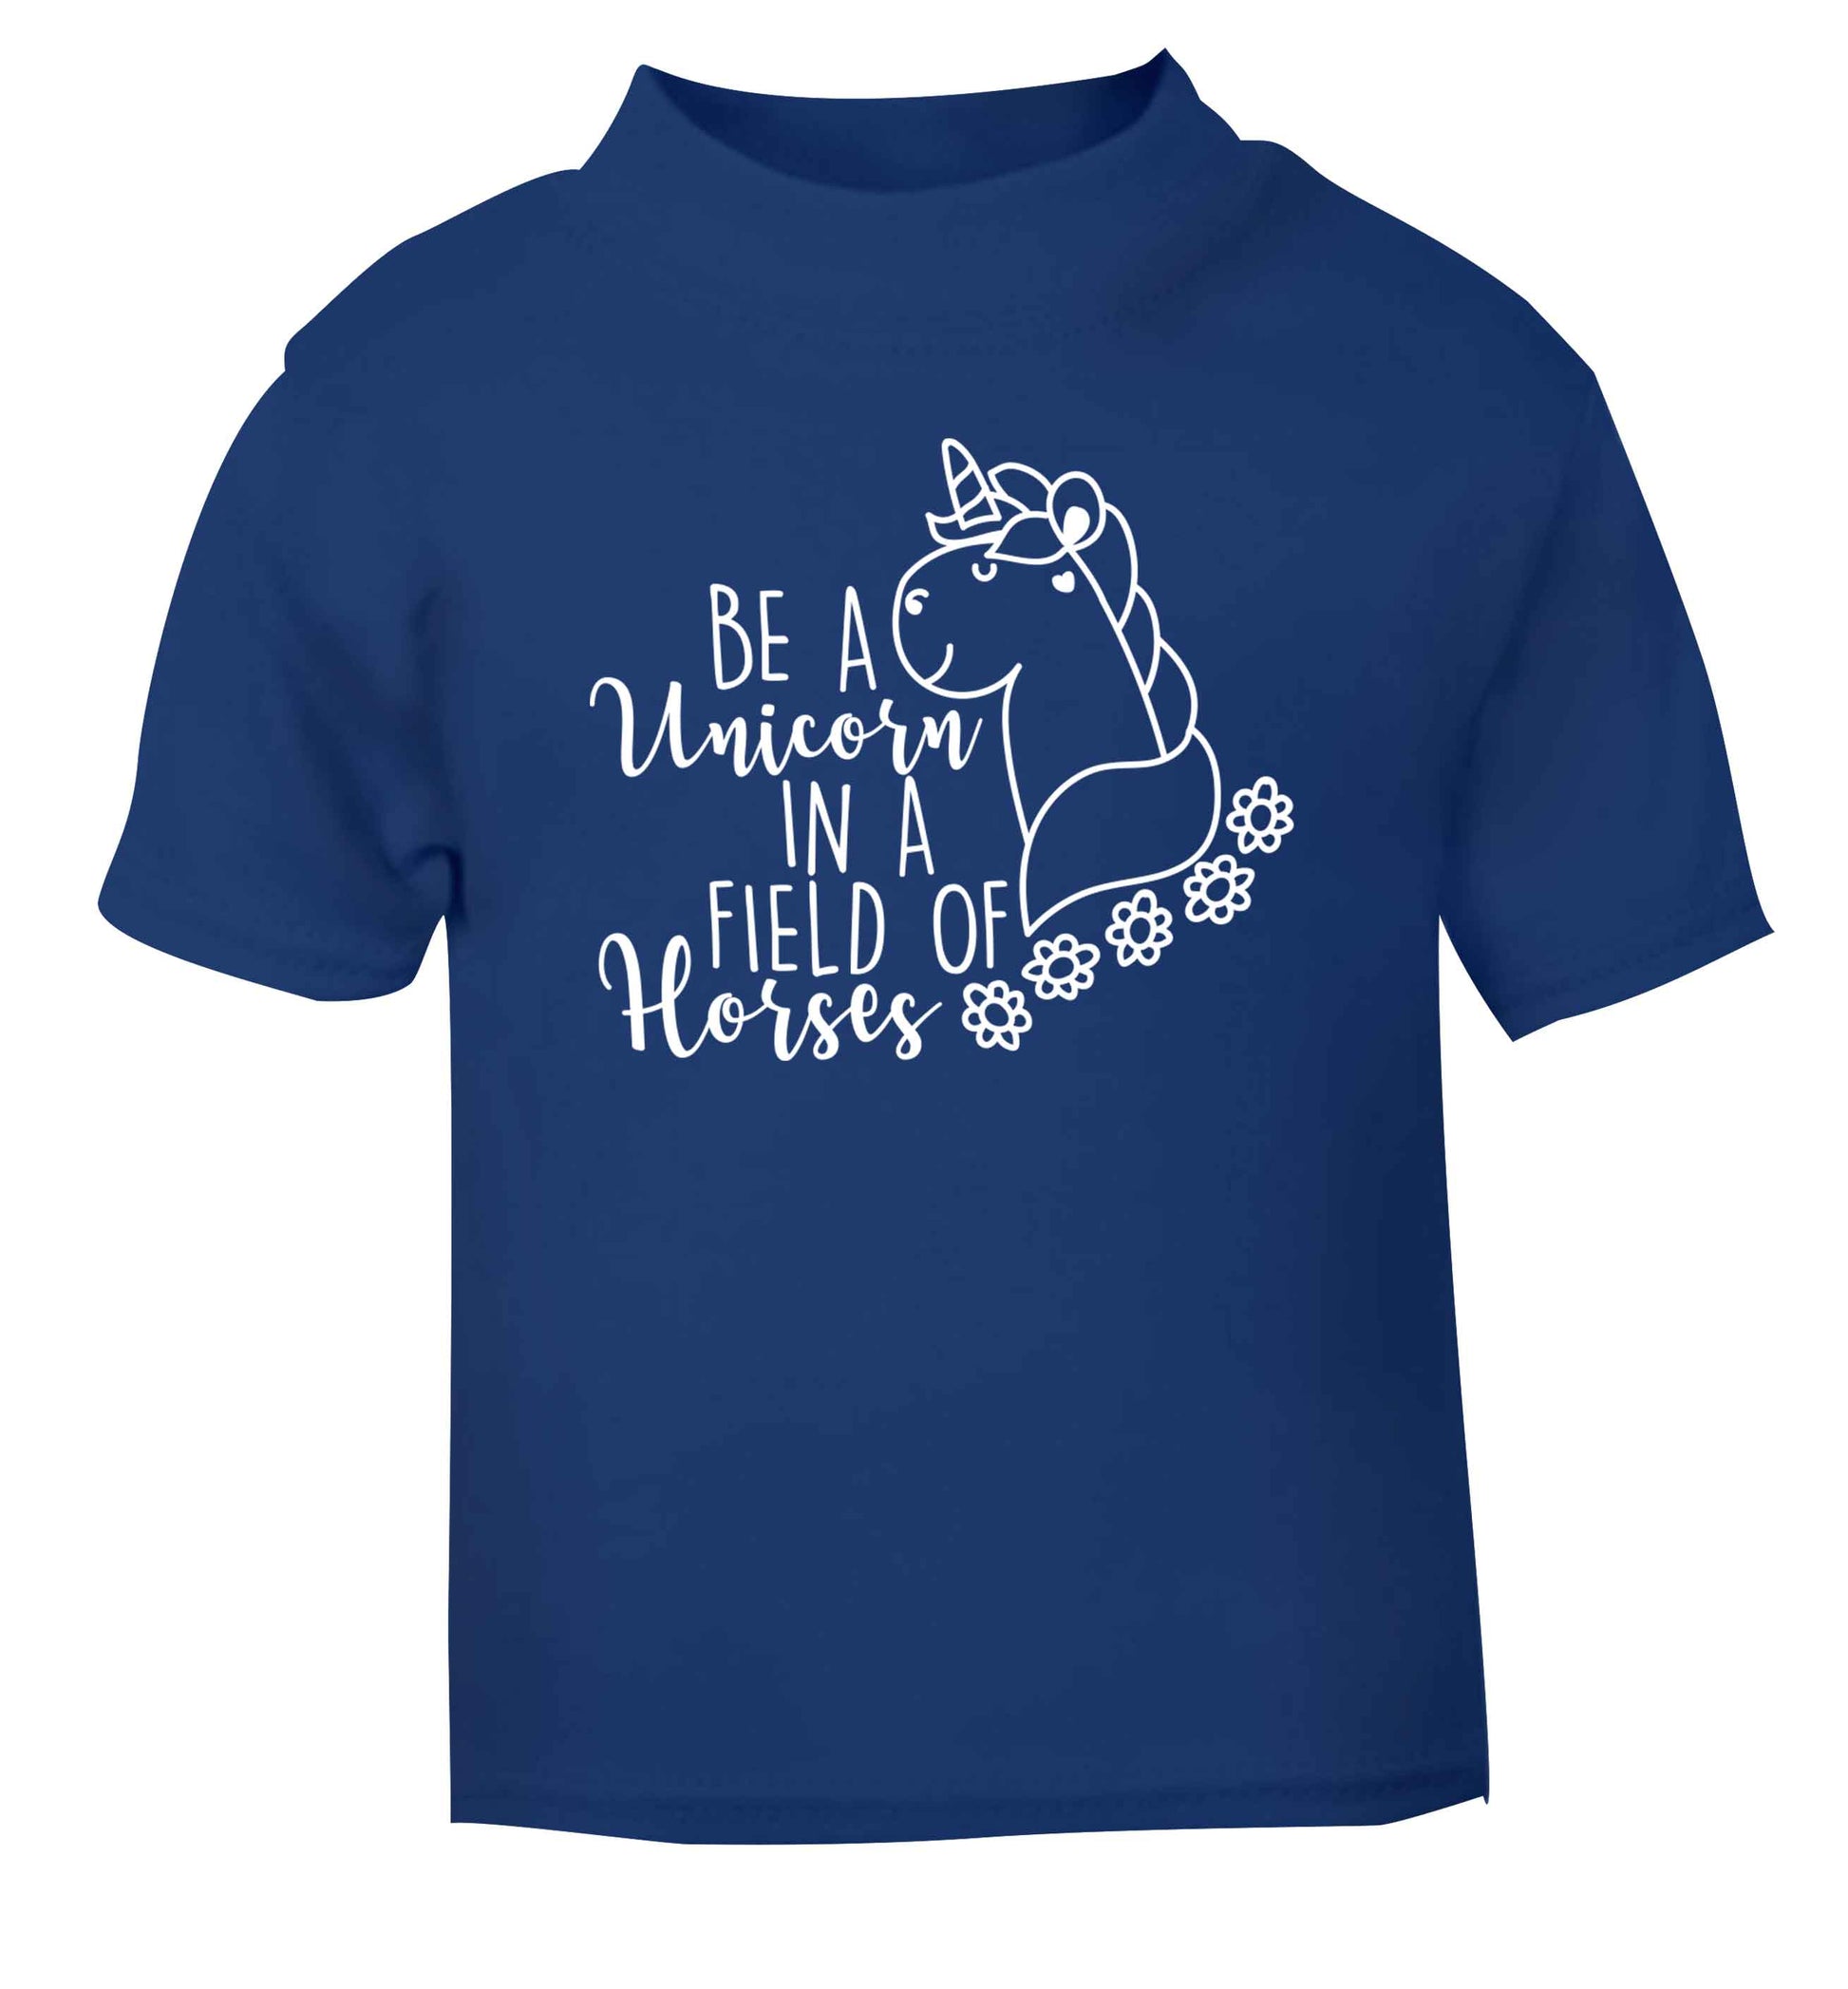 Be a unicorn in a field of horses blue Baby Toddler Tshirt 2 Years